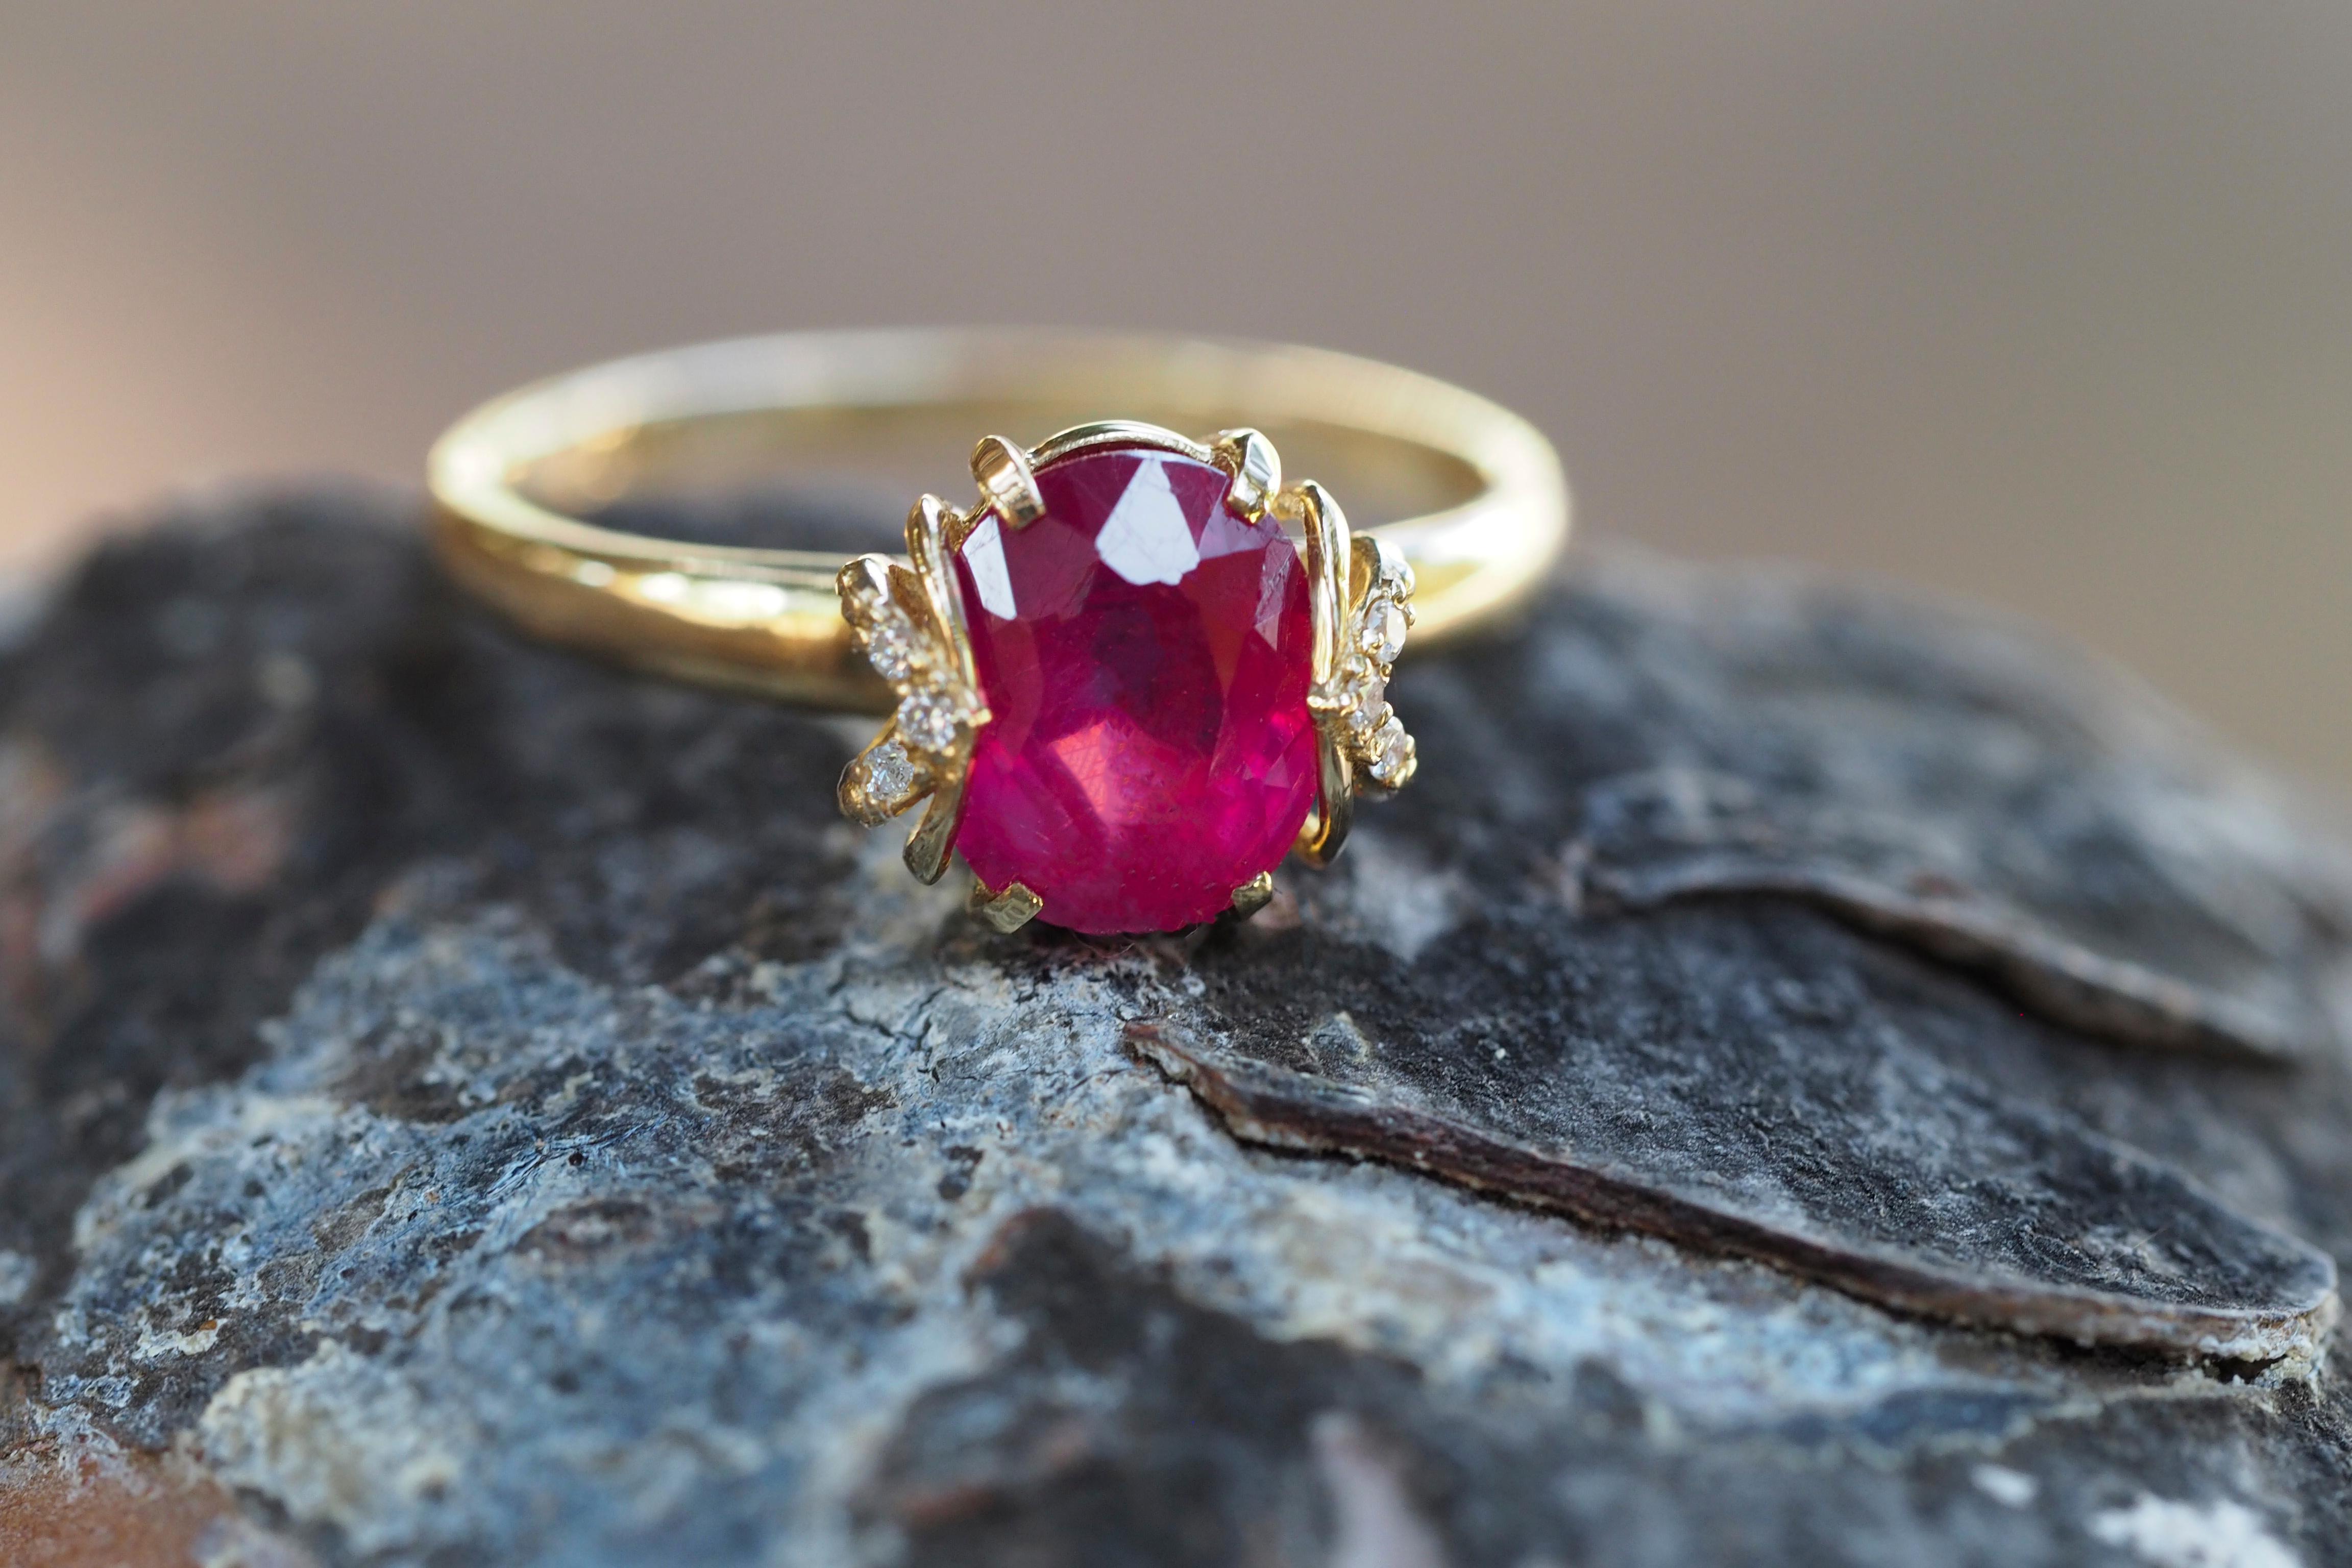 Women's 14 Karat Gold Ring with Ruby and Diamonds, Oval Ruby Ring